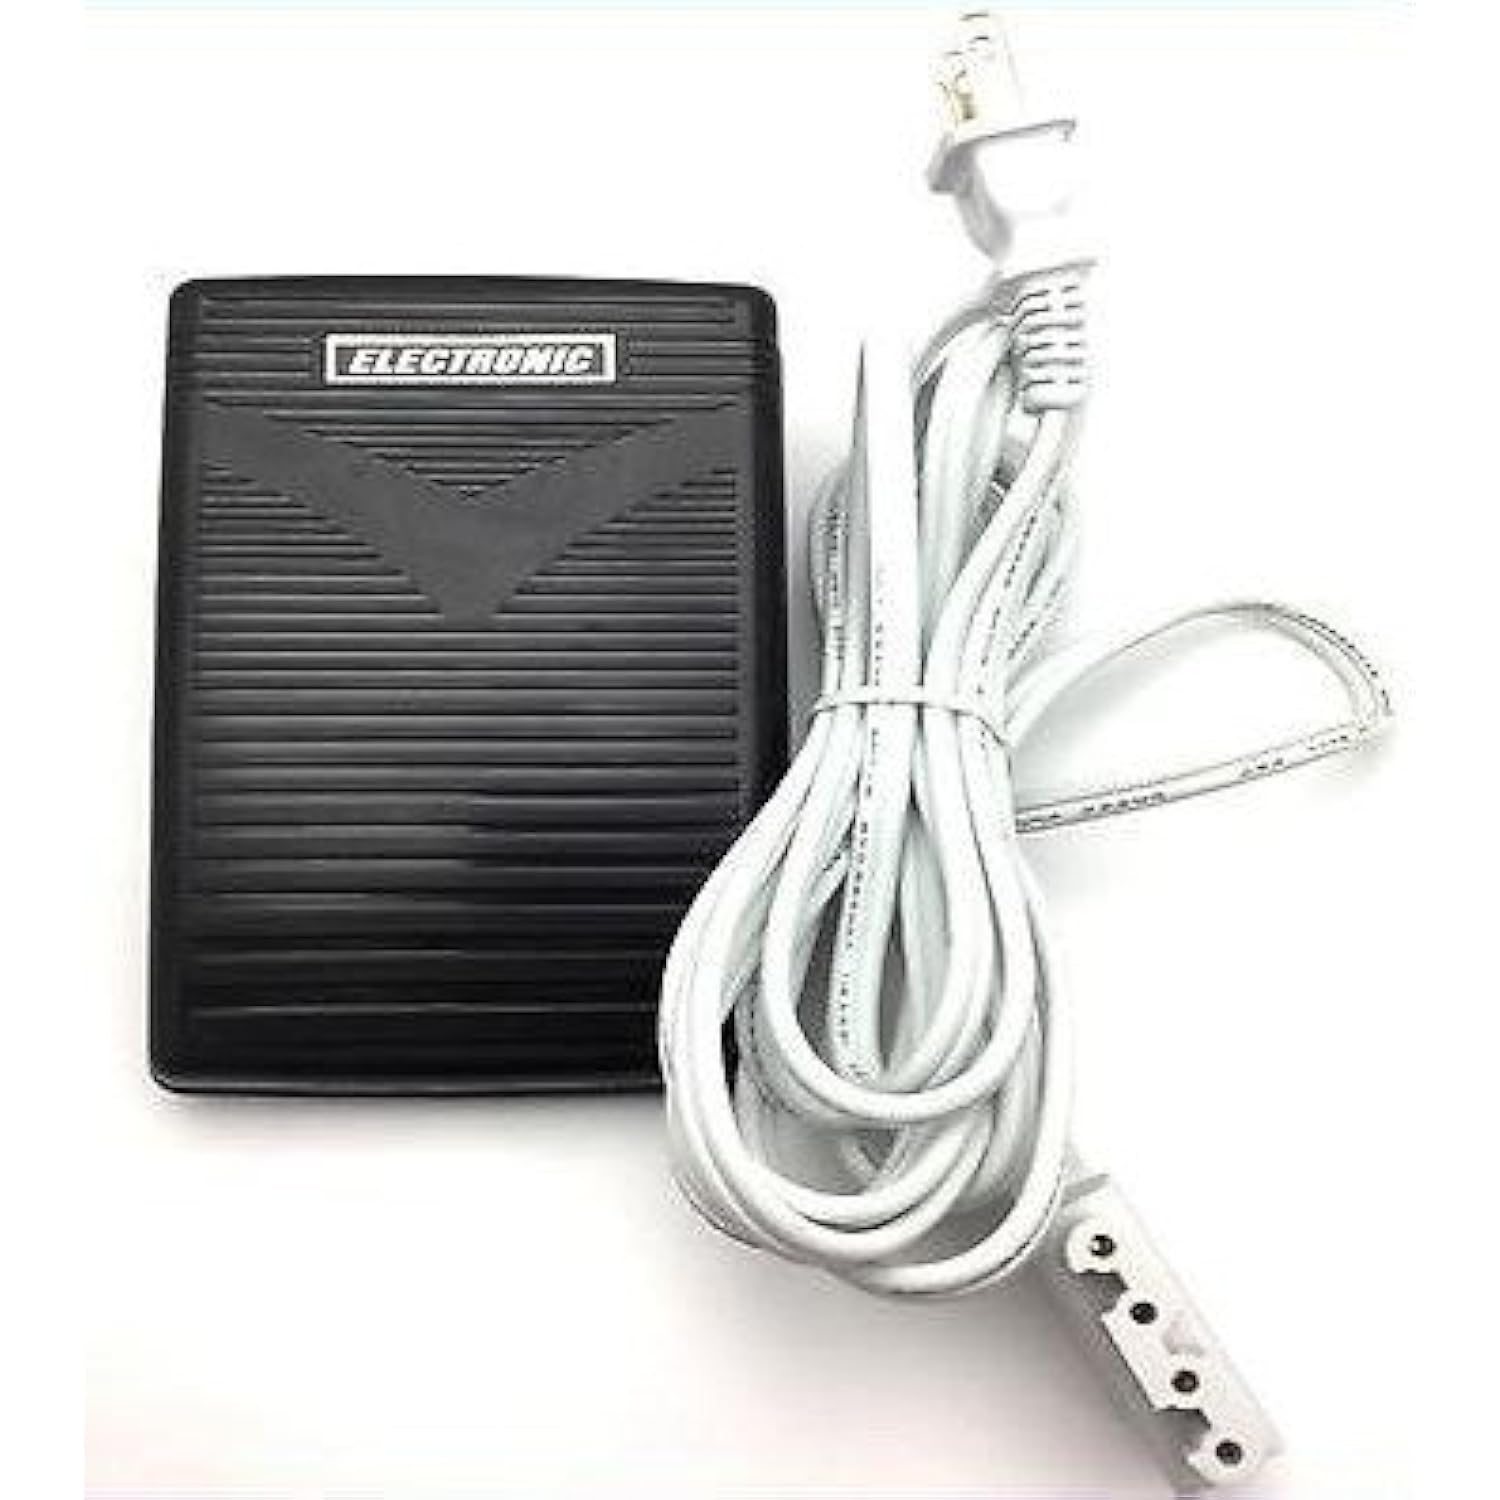 Great Choice Products Speed Control Foot Pedal + Cord For Bernina 830,831,800 Round Pins Type